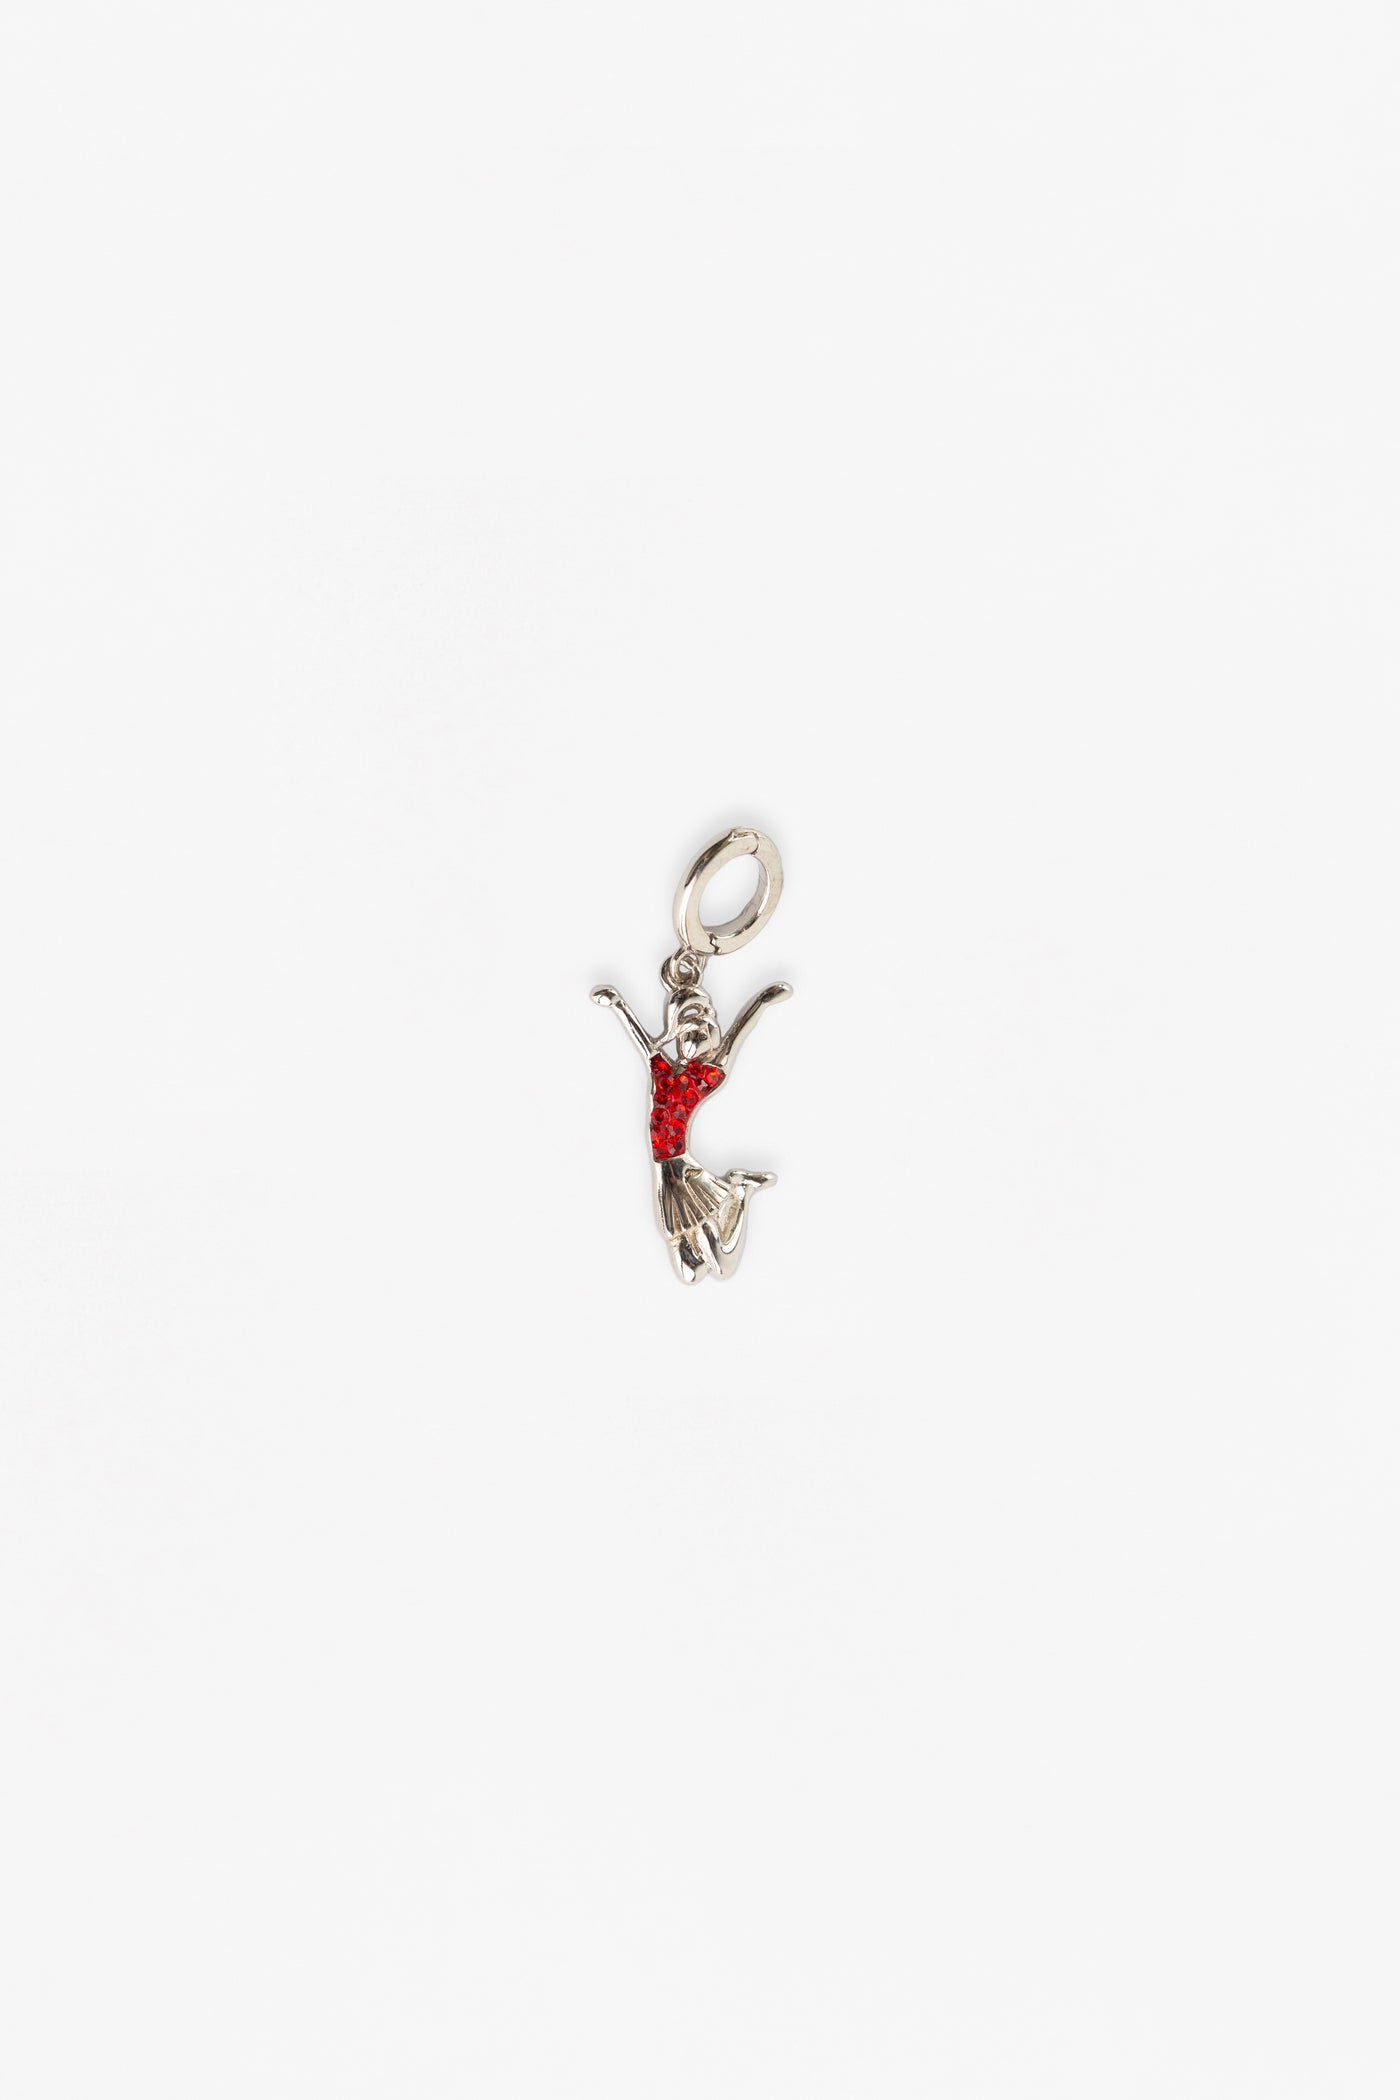 Cheerleader Jump in Air Crystal Sterling Silver Charm | Annie and Sisters